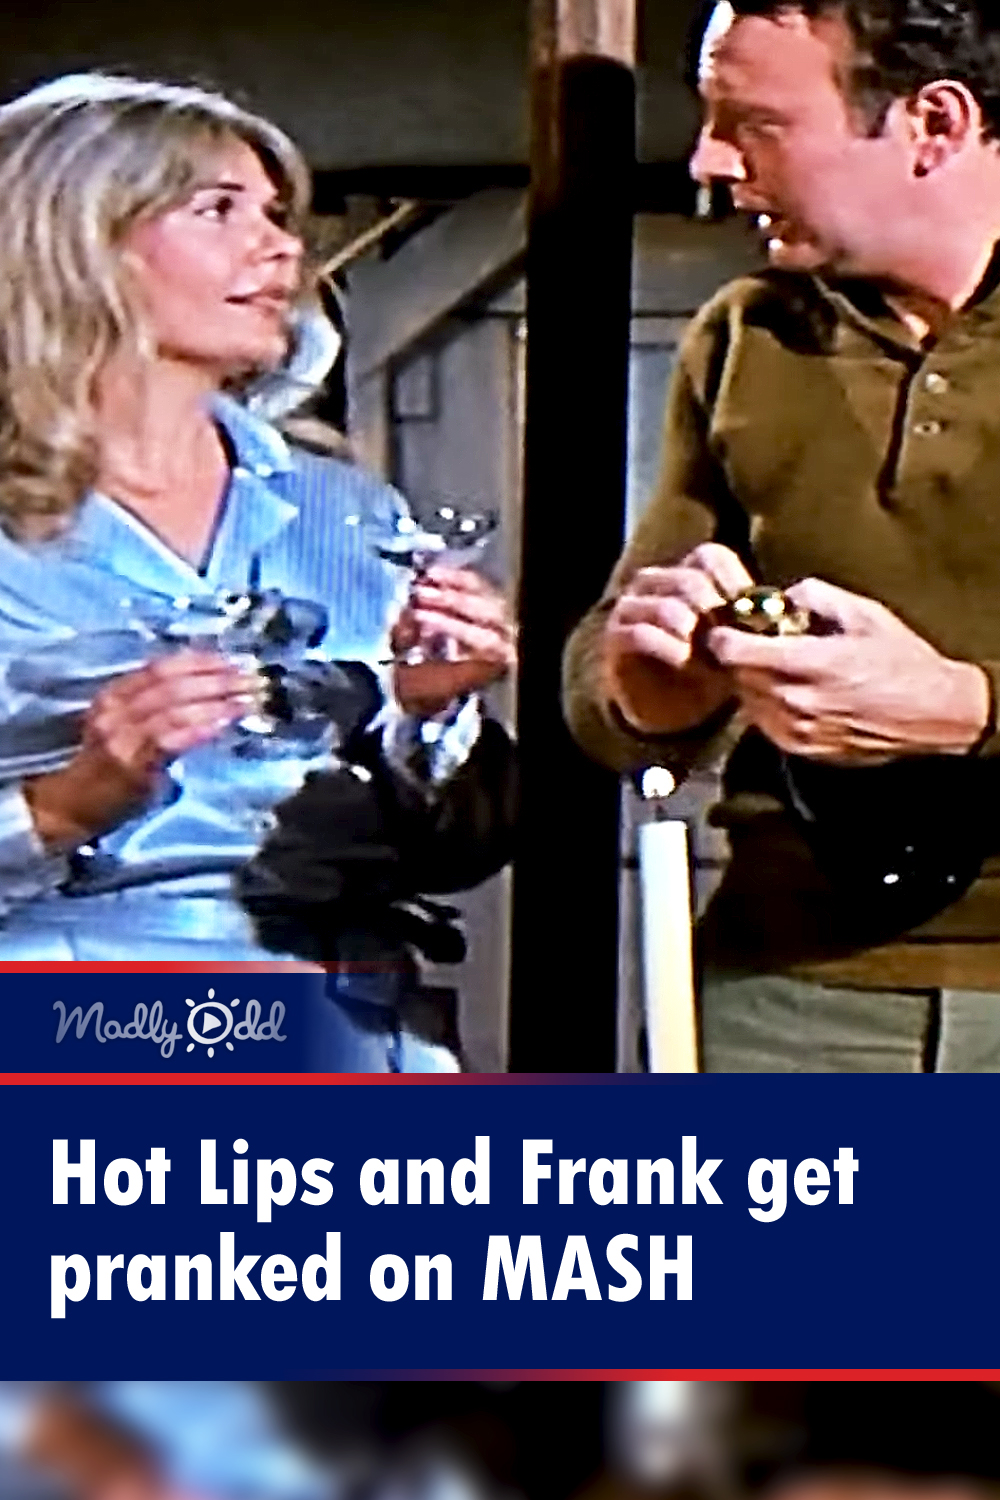 Hot Lips and Frank get pranked on MASH